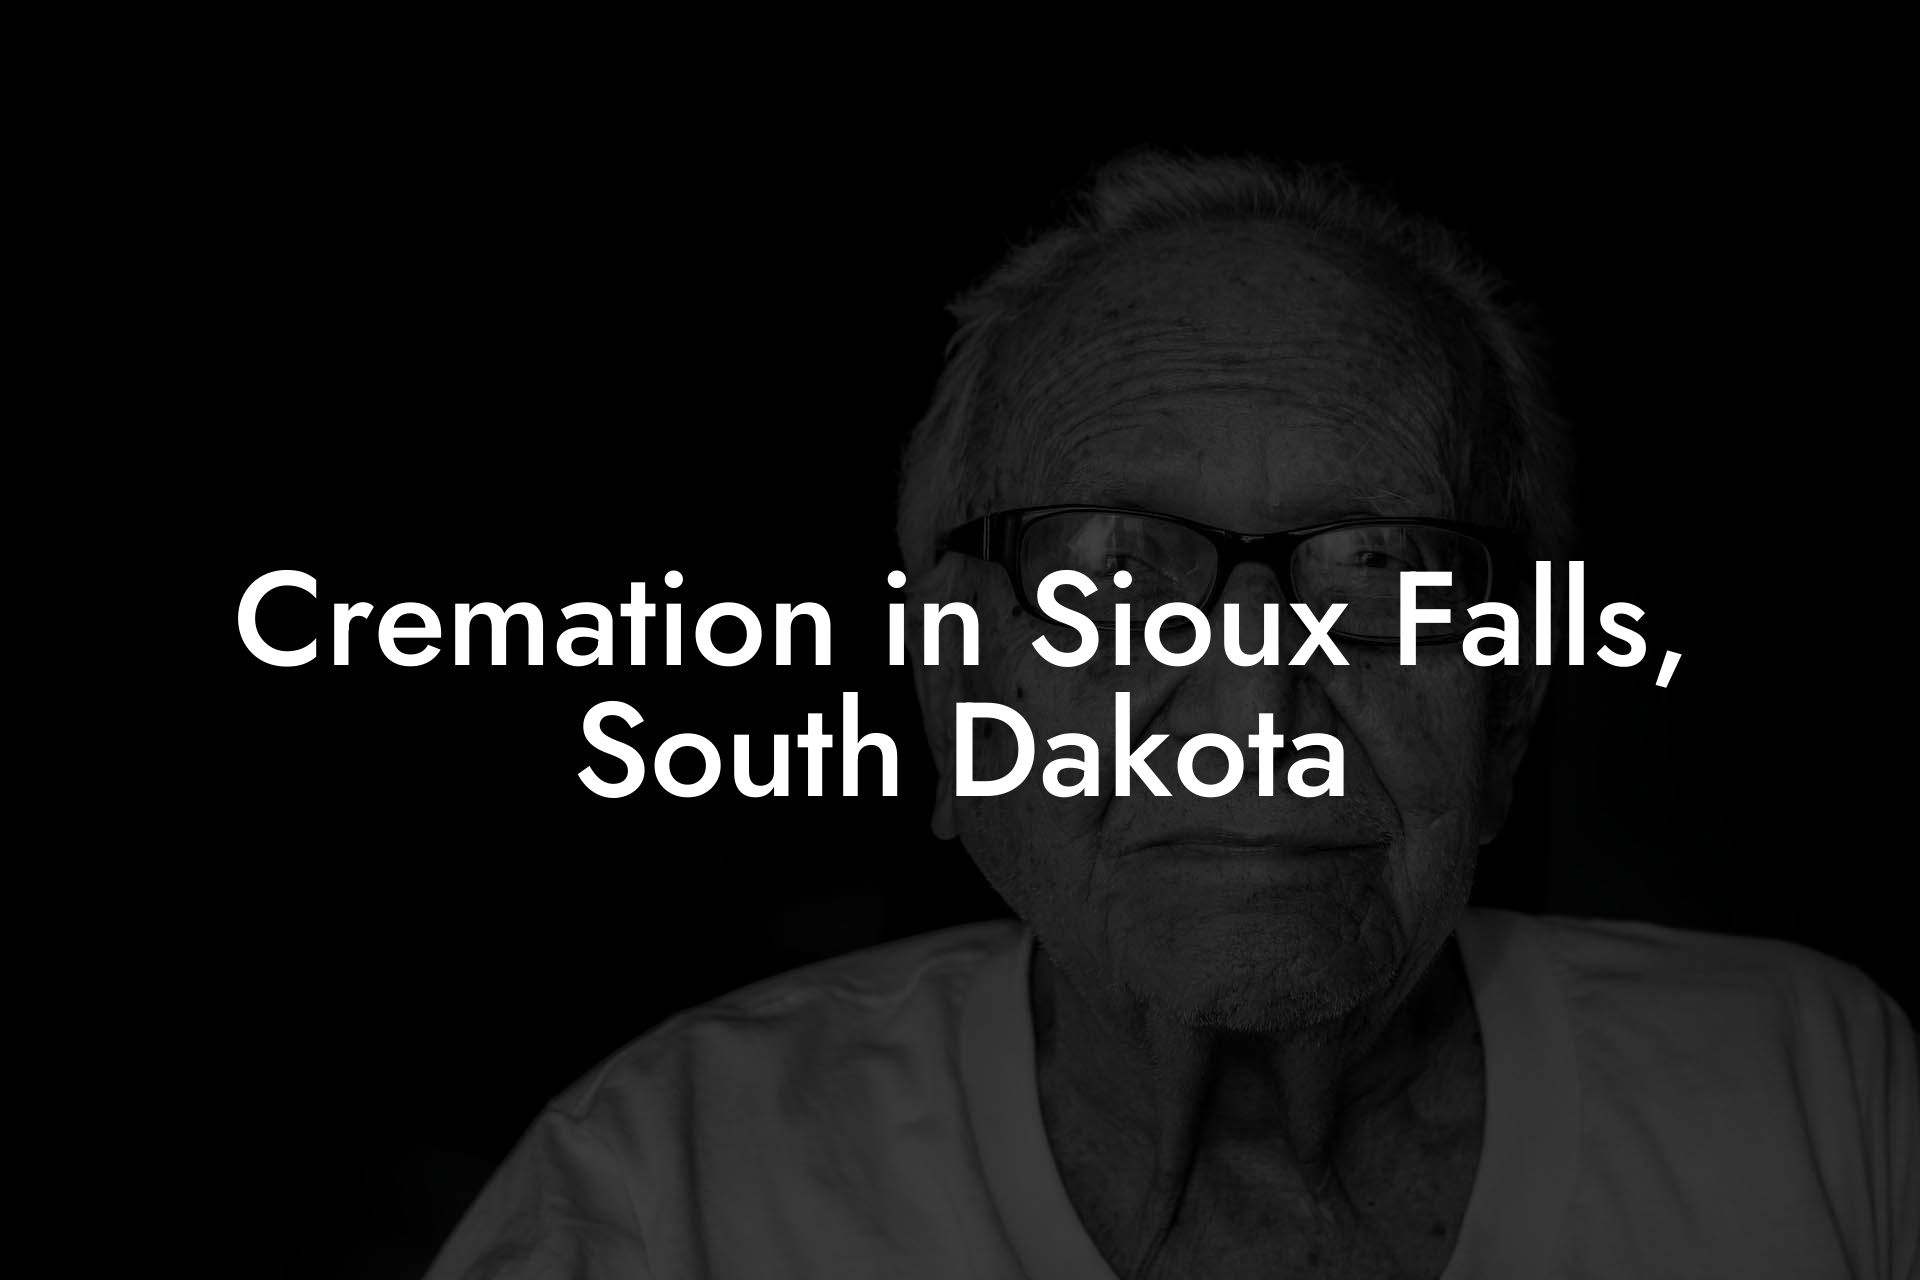 Cremation in Sioux Falls, South Dakota